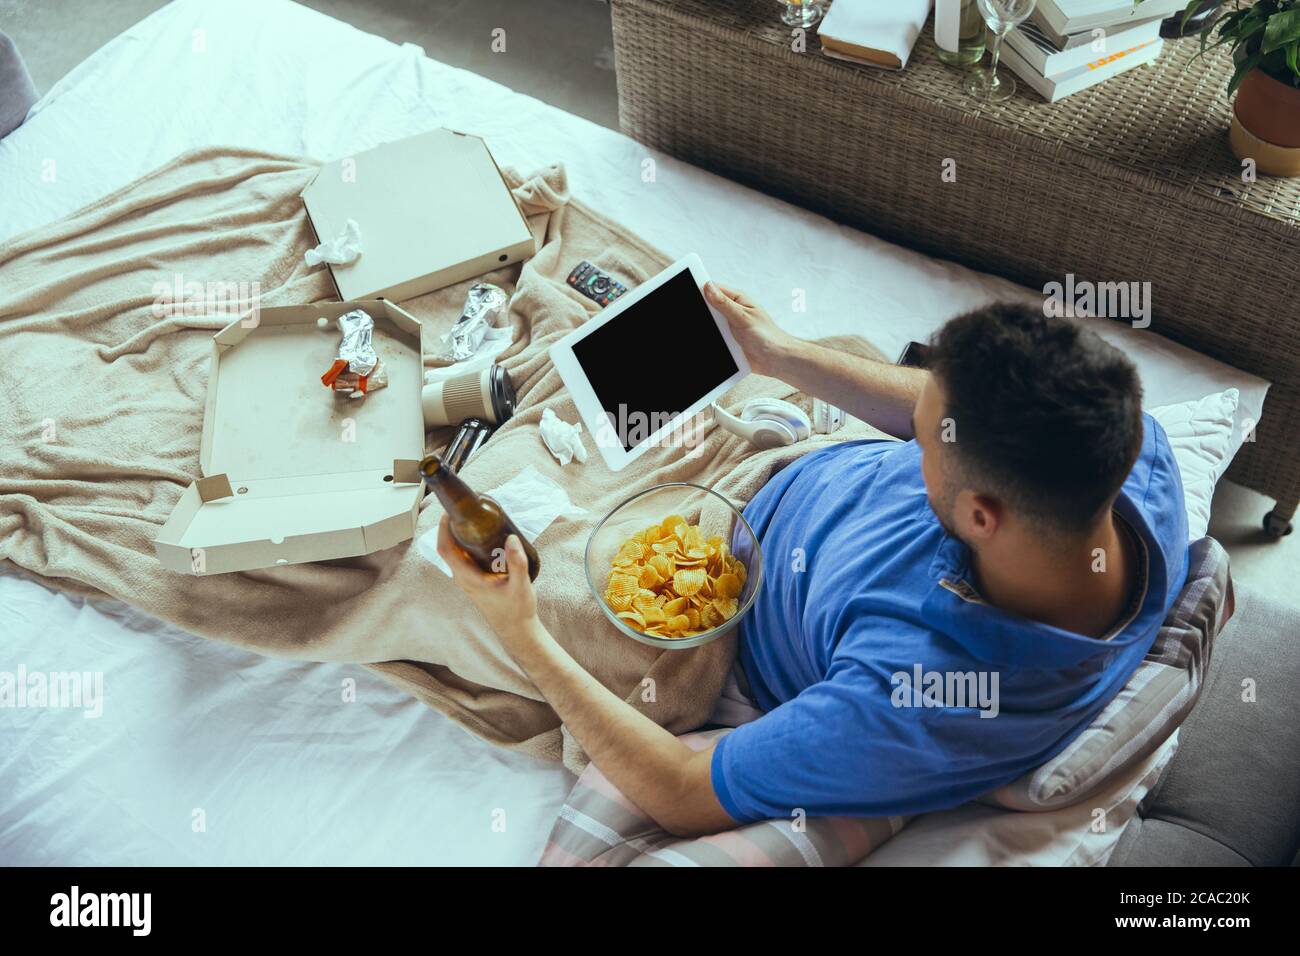 Eating crisps, drinks beer. Lazy man living in his bed surrounded with messy. No need to go out to be happy. Using gadgets, watching movie and series, looks emotional. Tablet with copyspace for ad. Stock Photo